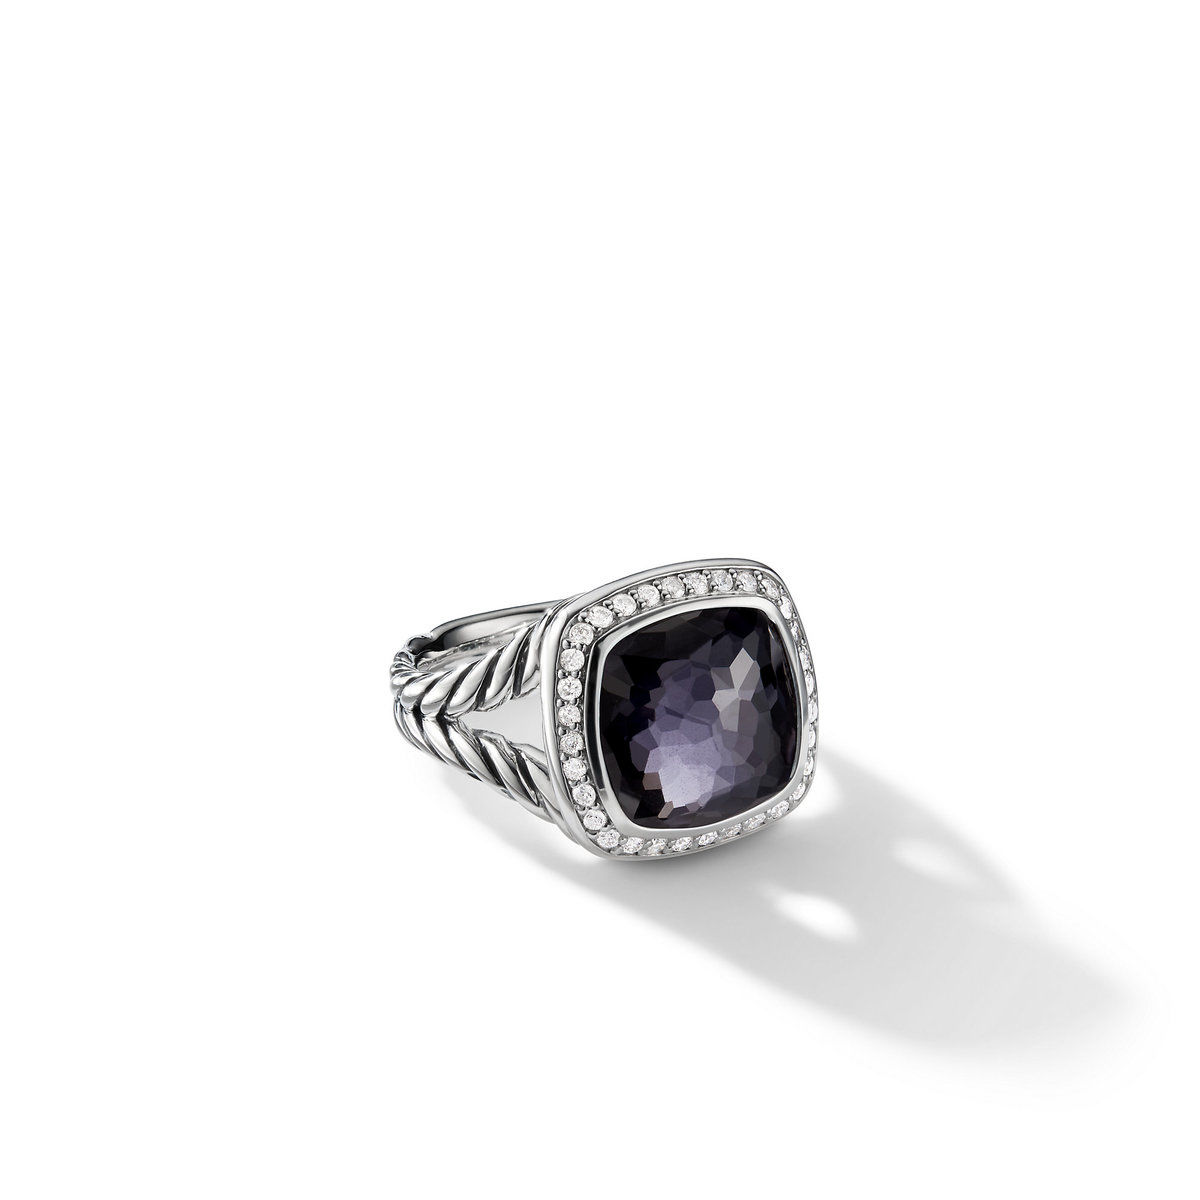 David Yurman Albion Ring with Black Orchid and Pave Diamonds | Size 5